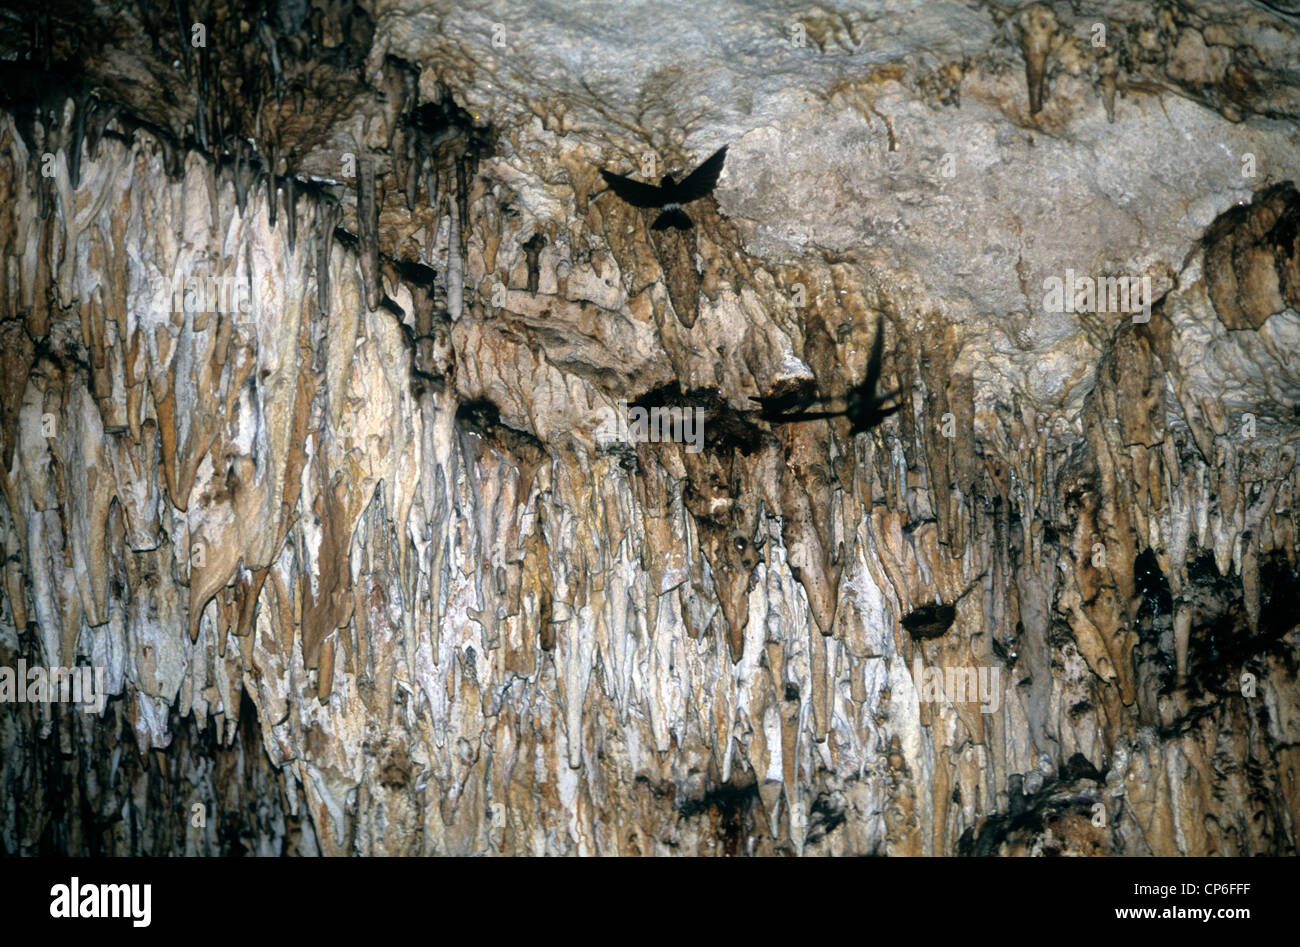 Tonga, South Pacific, Anahulu Höhle mit Verschachtelung Höhle schluckt. Stockfoto